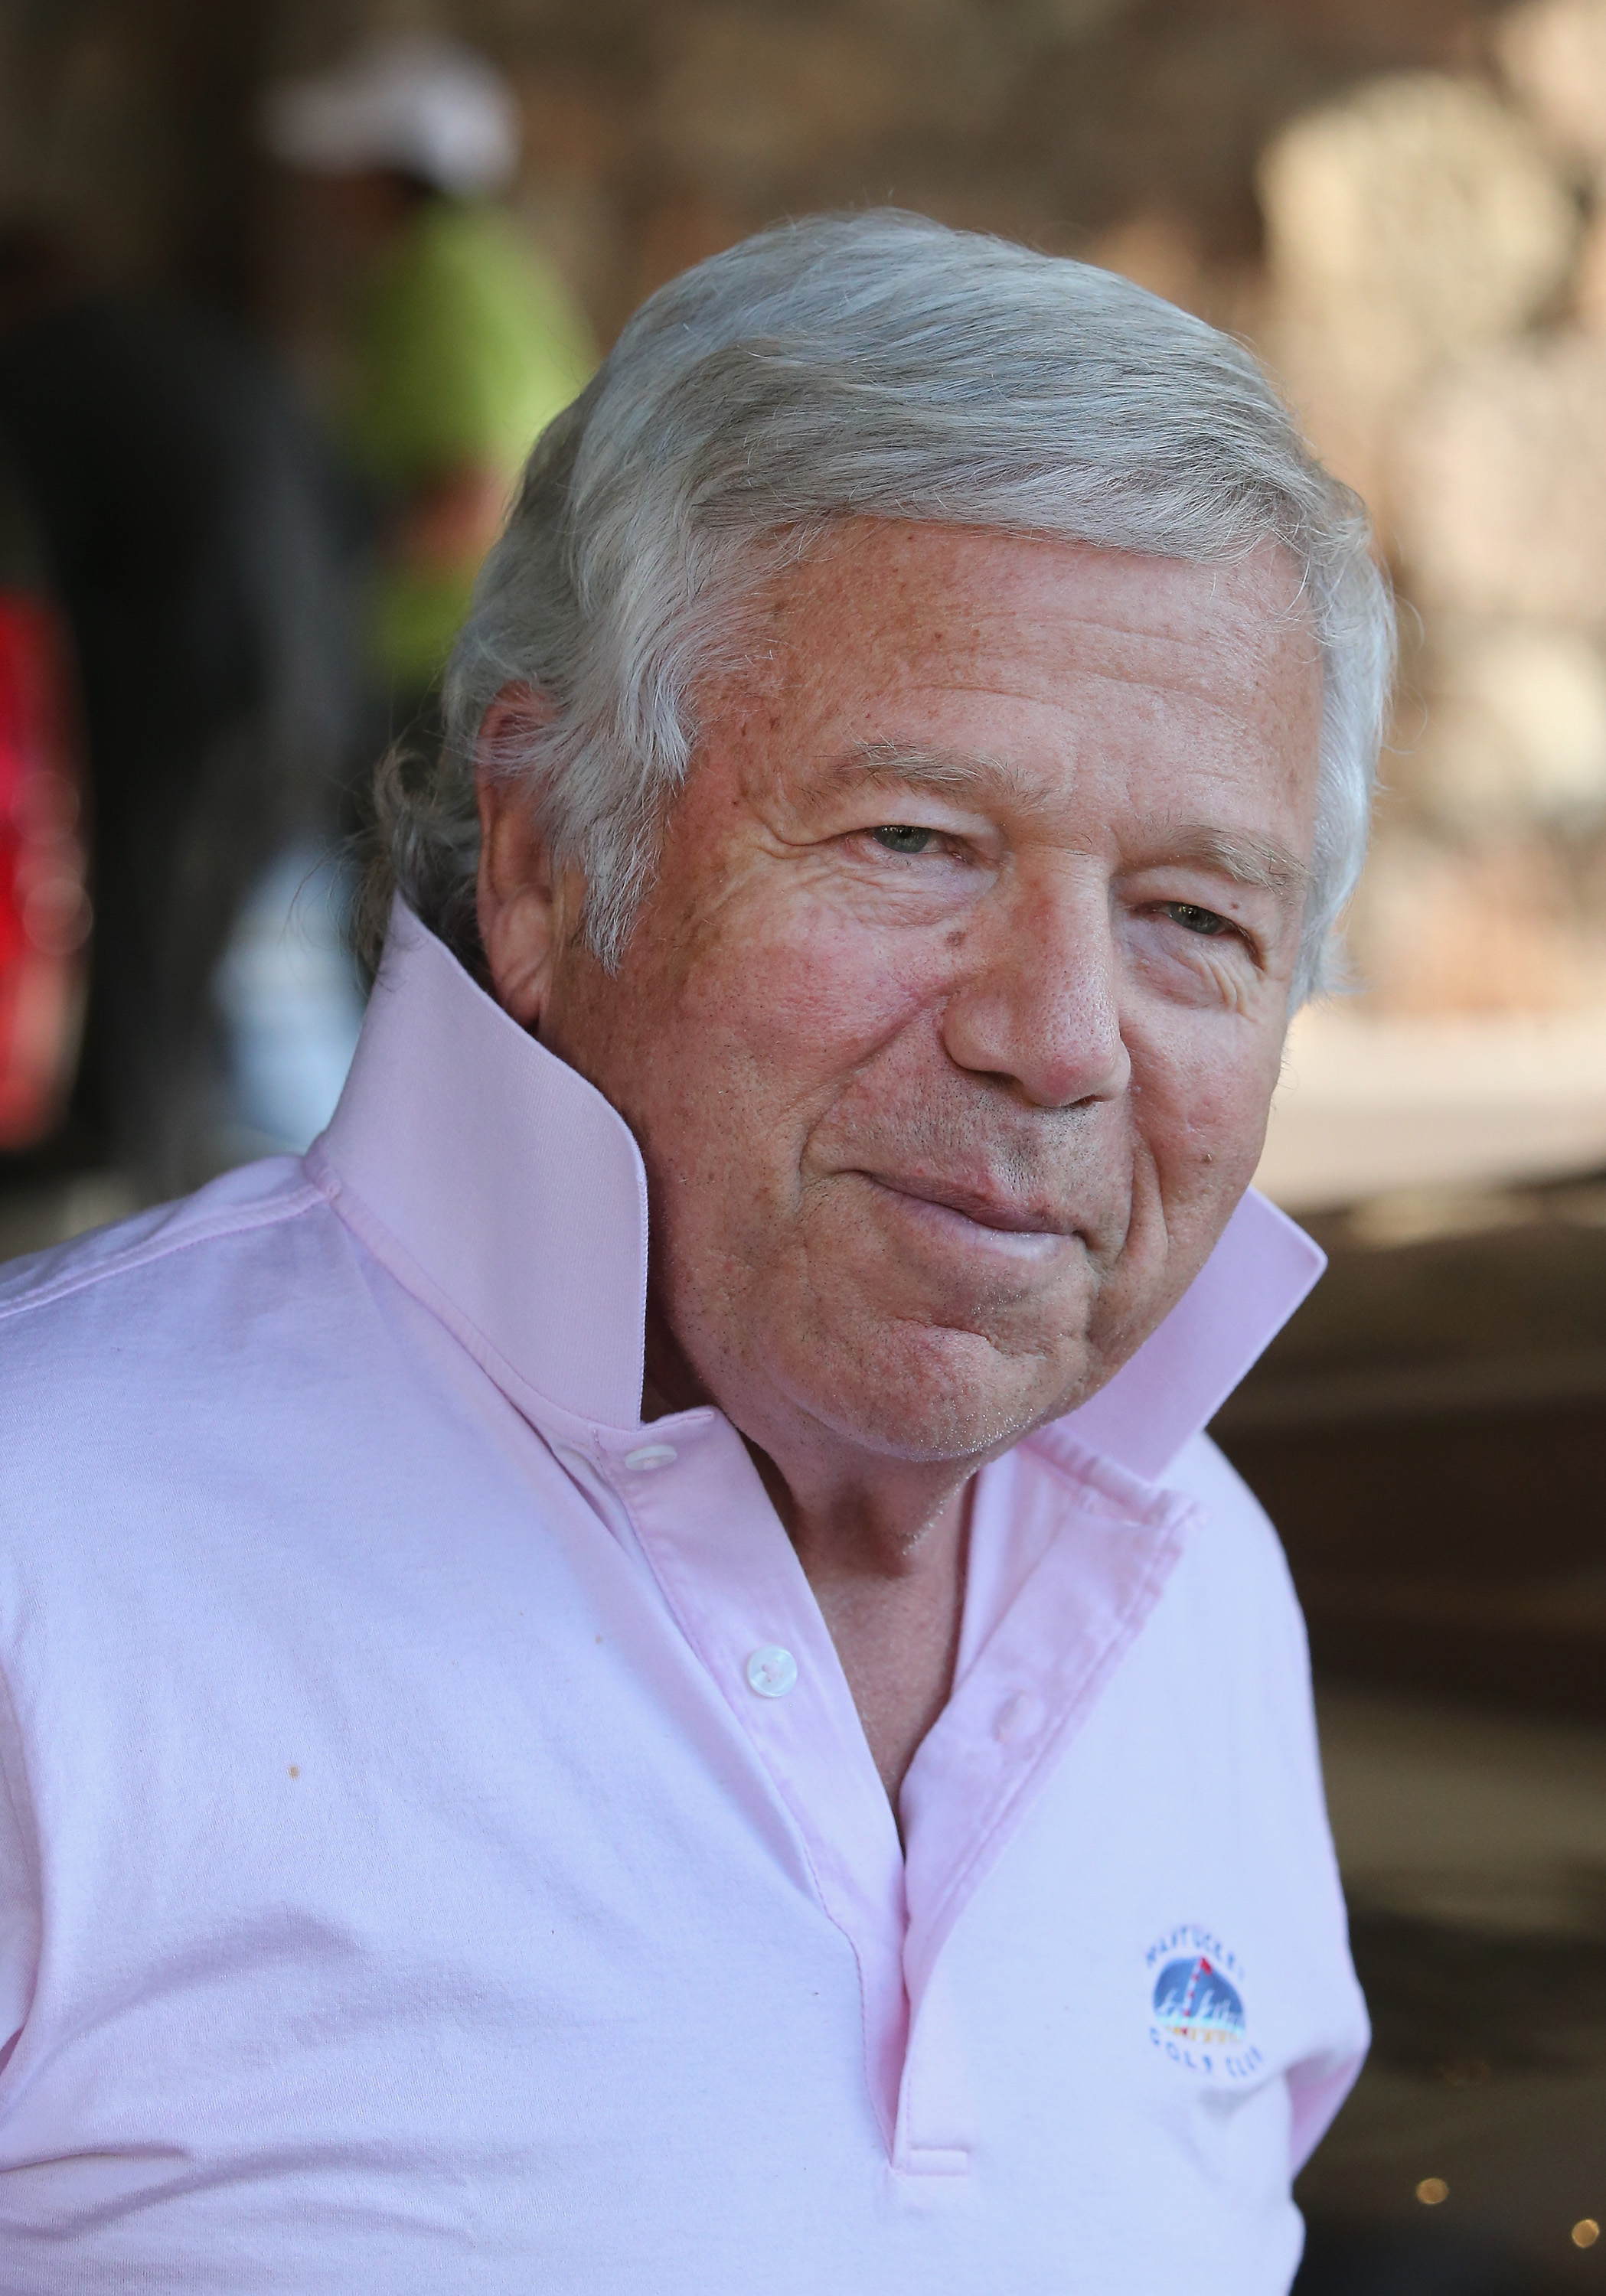 If The Patriots Are Innocent Why Did Robert Kraft Suspend ‘the 